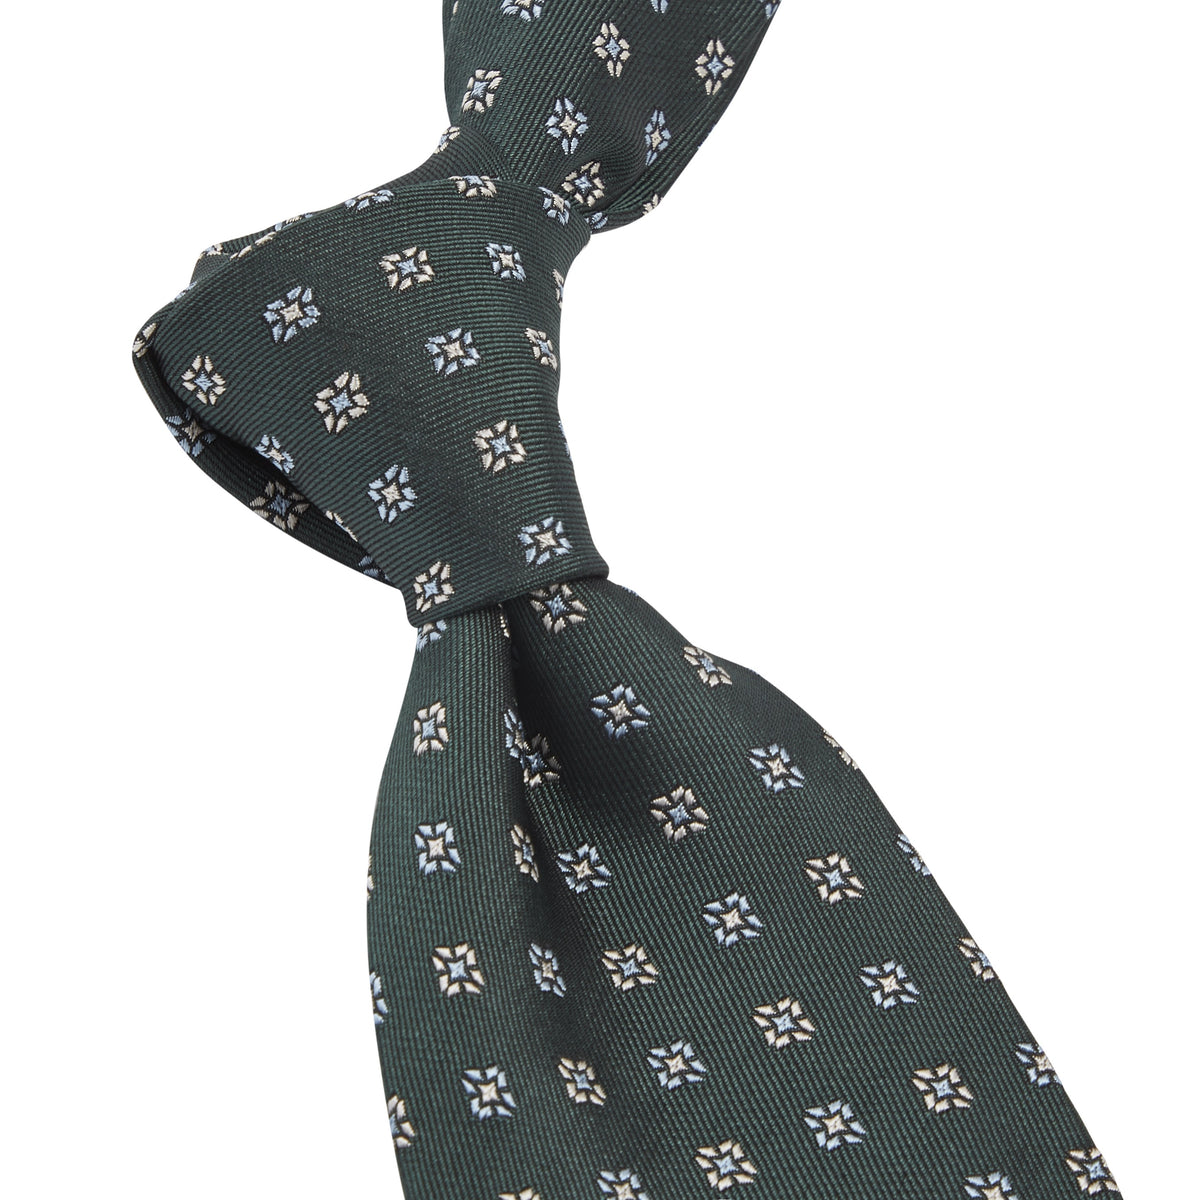 A Sovereign Grade Forest Green Square Floral Jacquard Tie with white flowers on a green silk background from KirbyAllison.com.